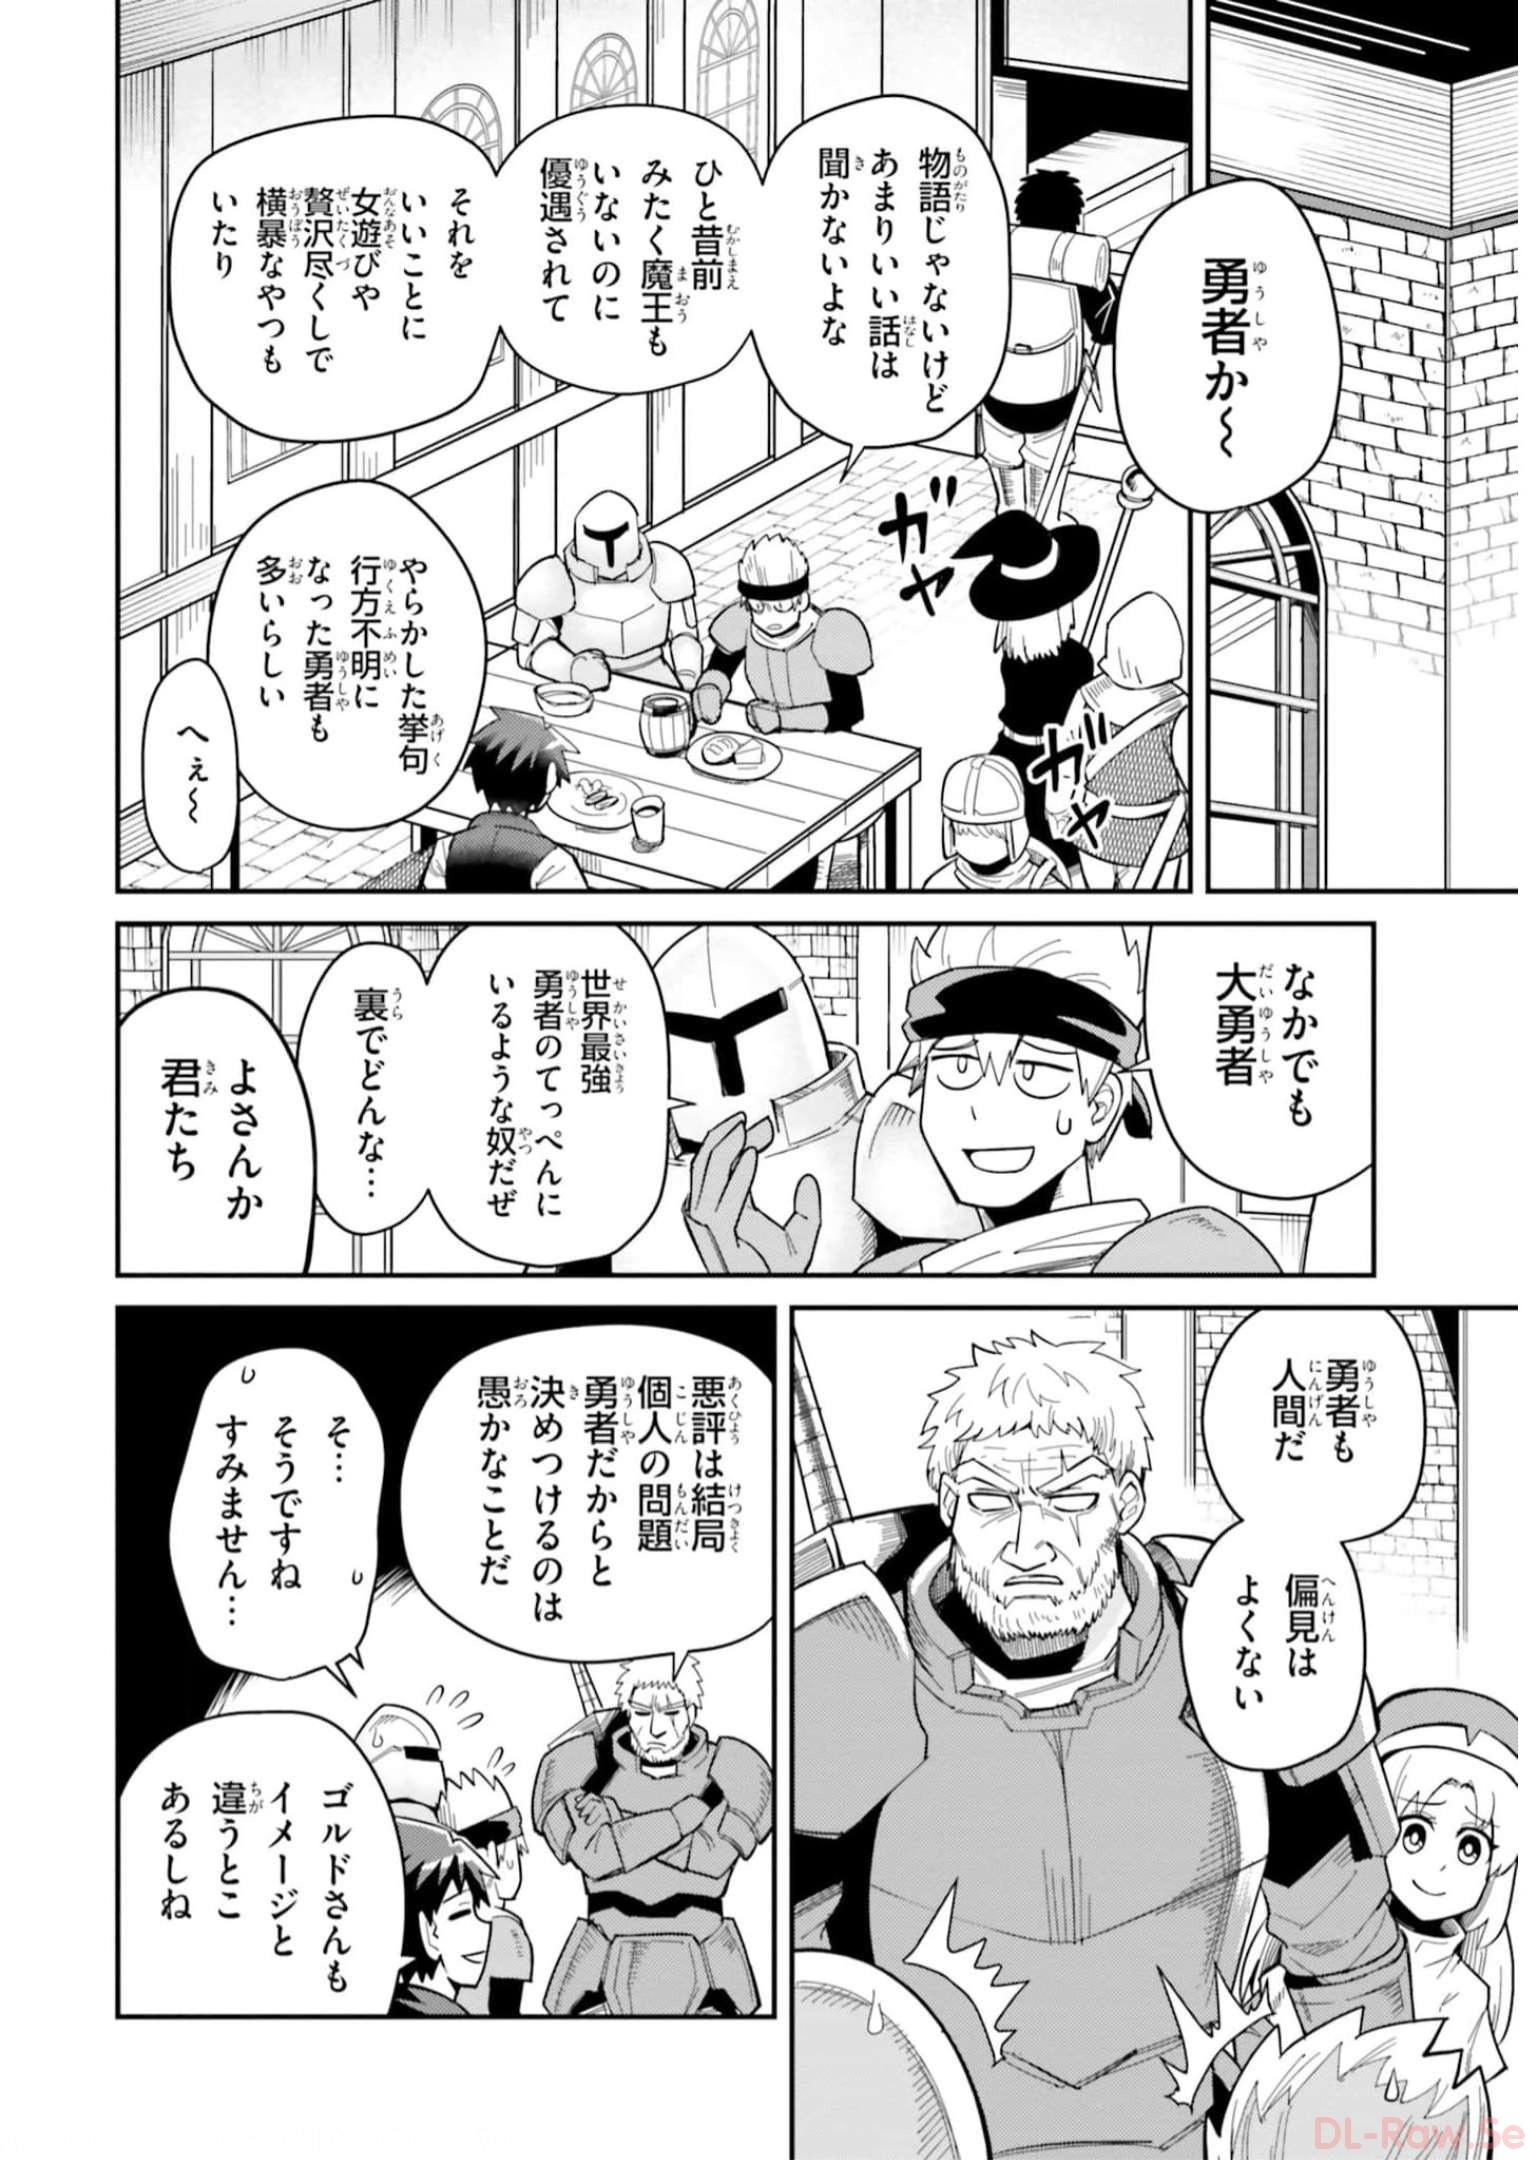 Dungeon Friends Forever Dungeon's Childhood Friend ダンジョンの幼なじみ 第27話 - Page 3